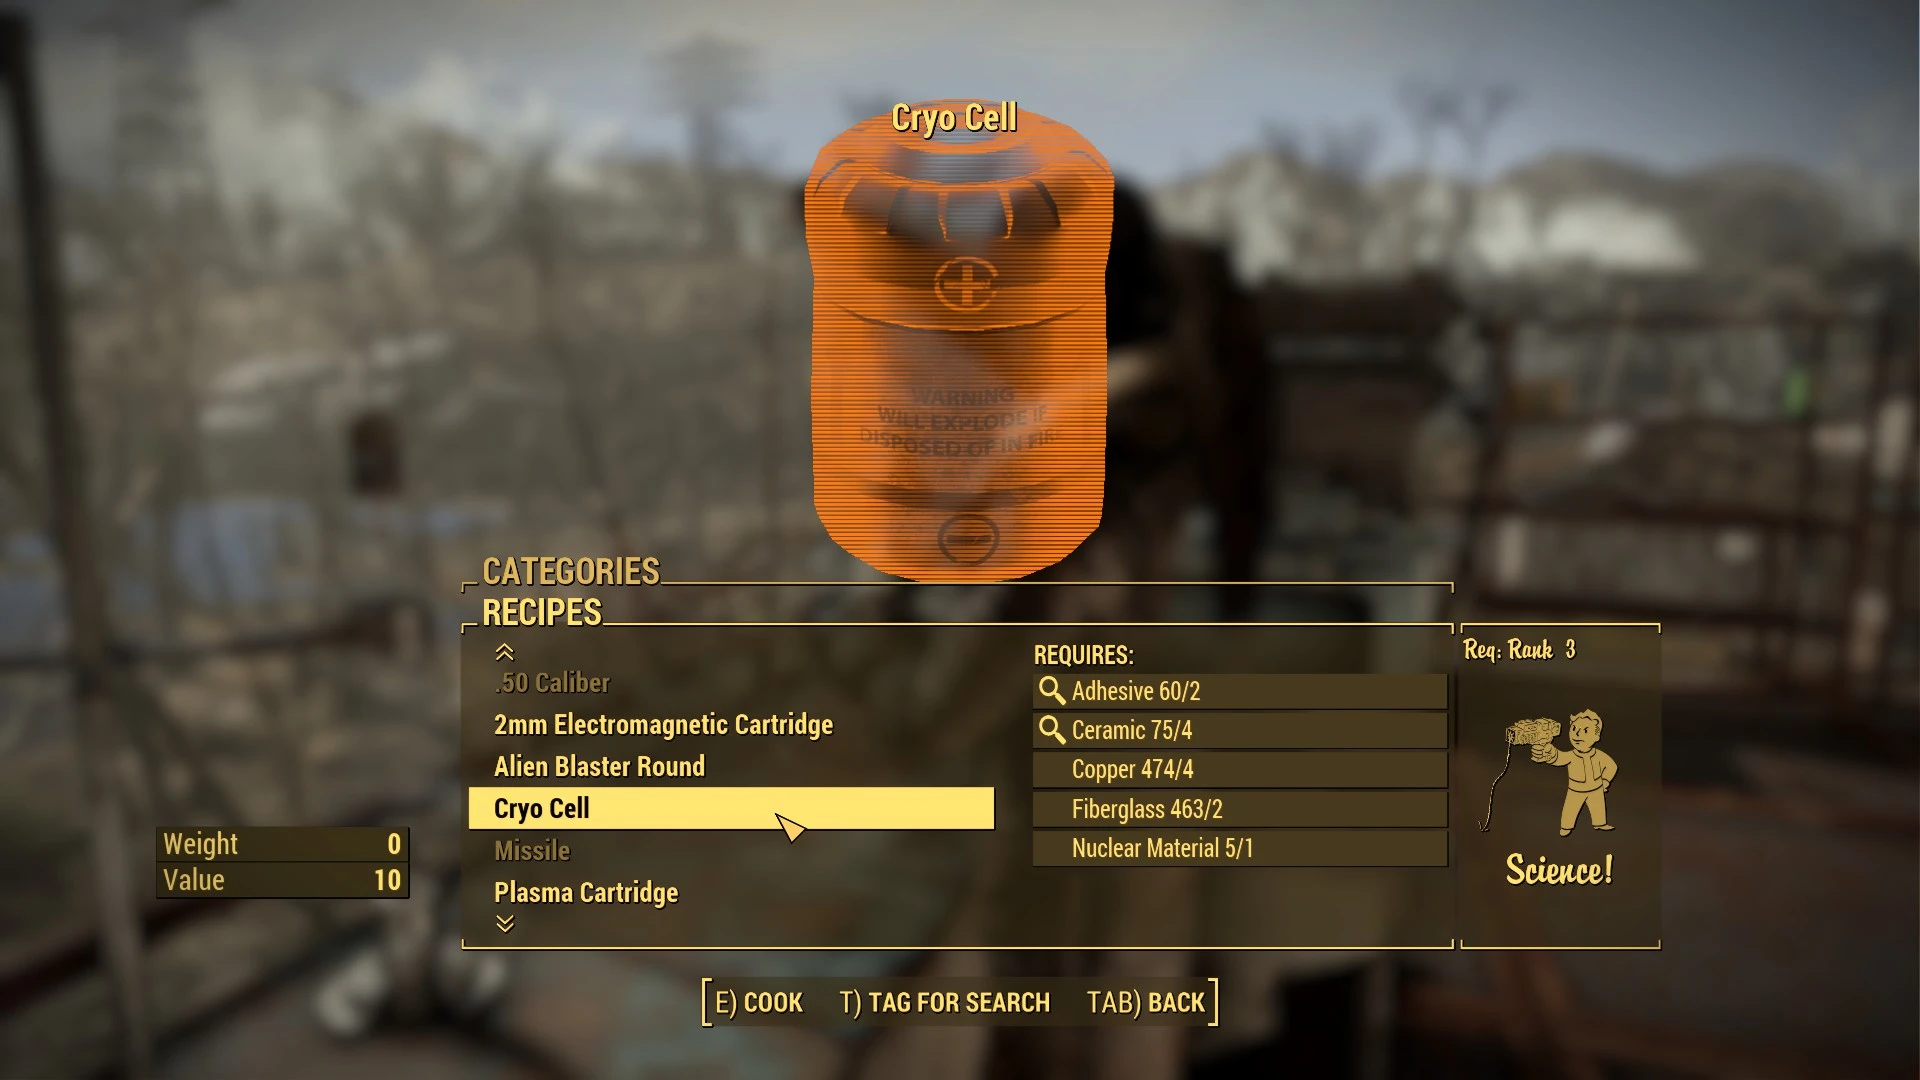 where can i find ammo in fallout 4